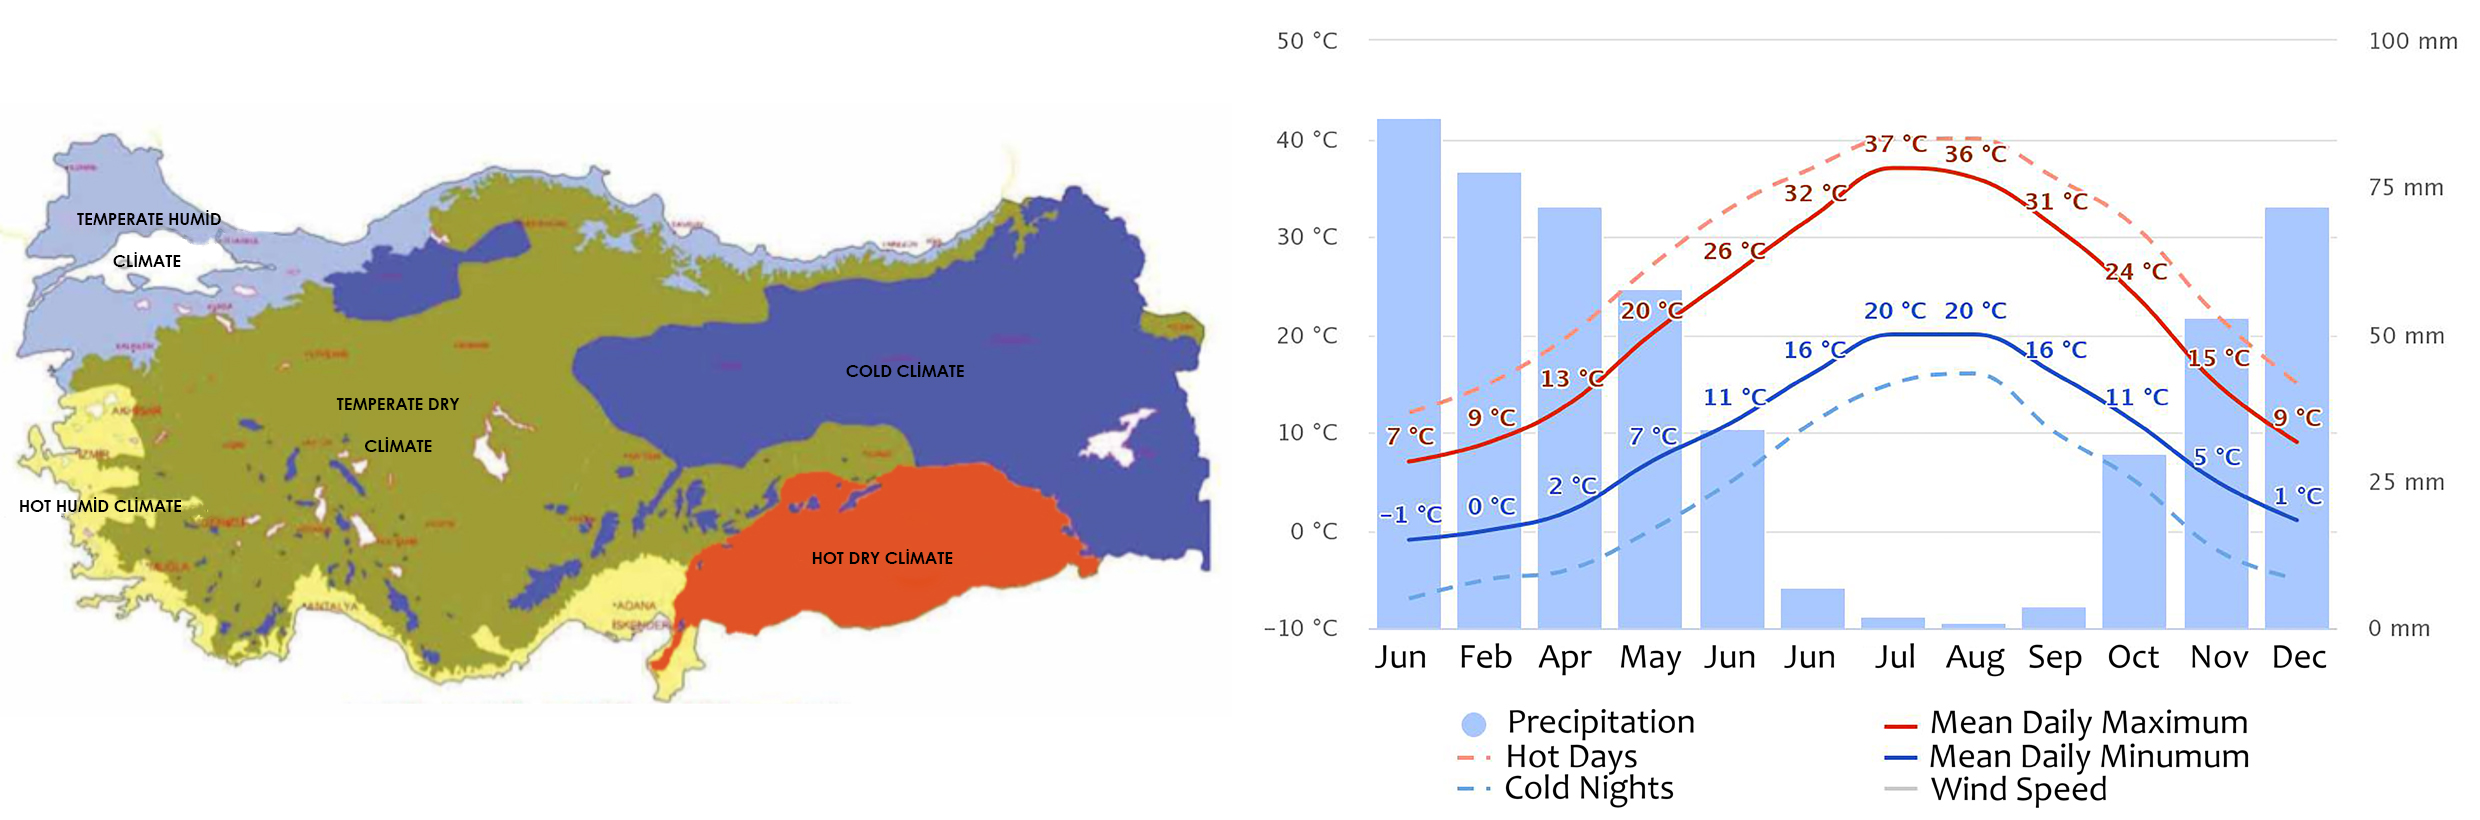 Climatic characteristics of the research area (a) Temperature and precipitation status of Mardin city and (b) Climatic zones of Turkey [23].